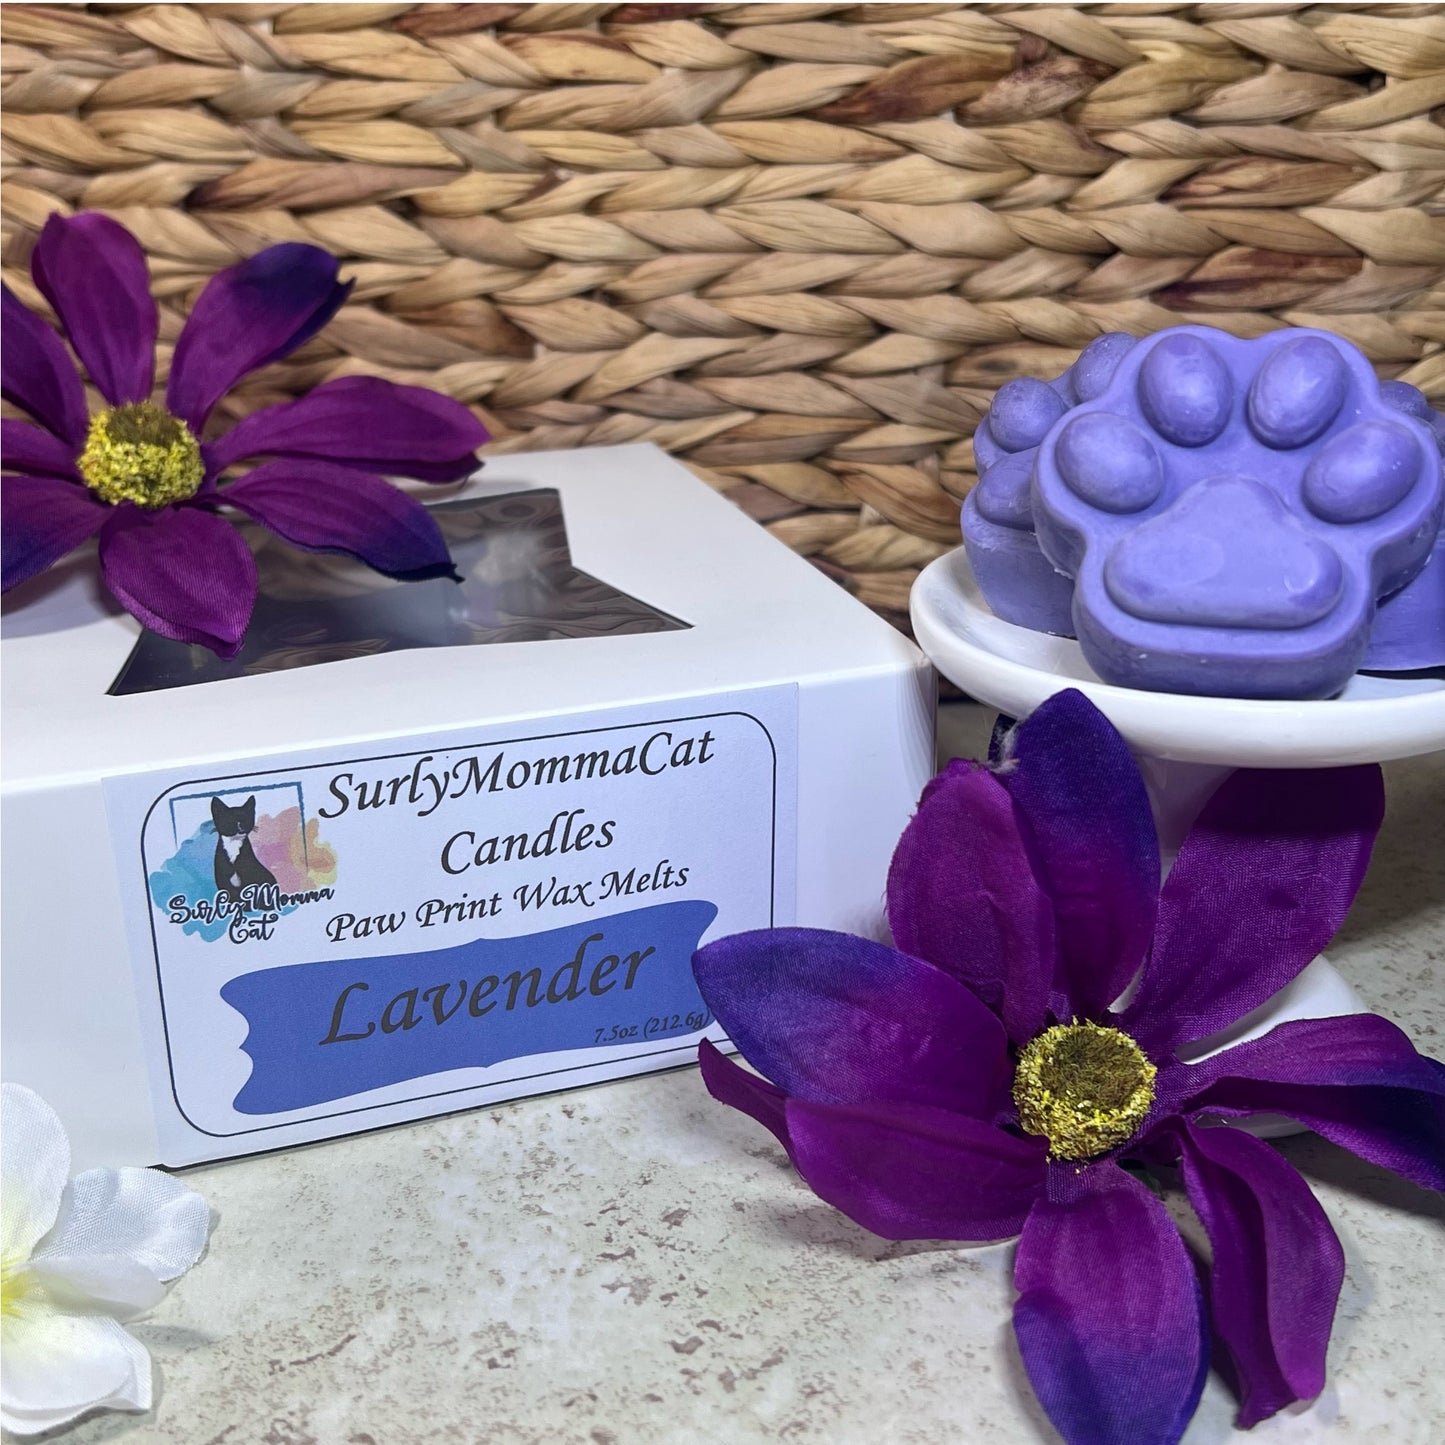 Purple Lavender Soy Paw print wax melts, with two large purple flowers for decoration.